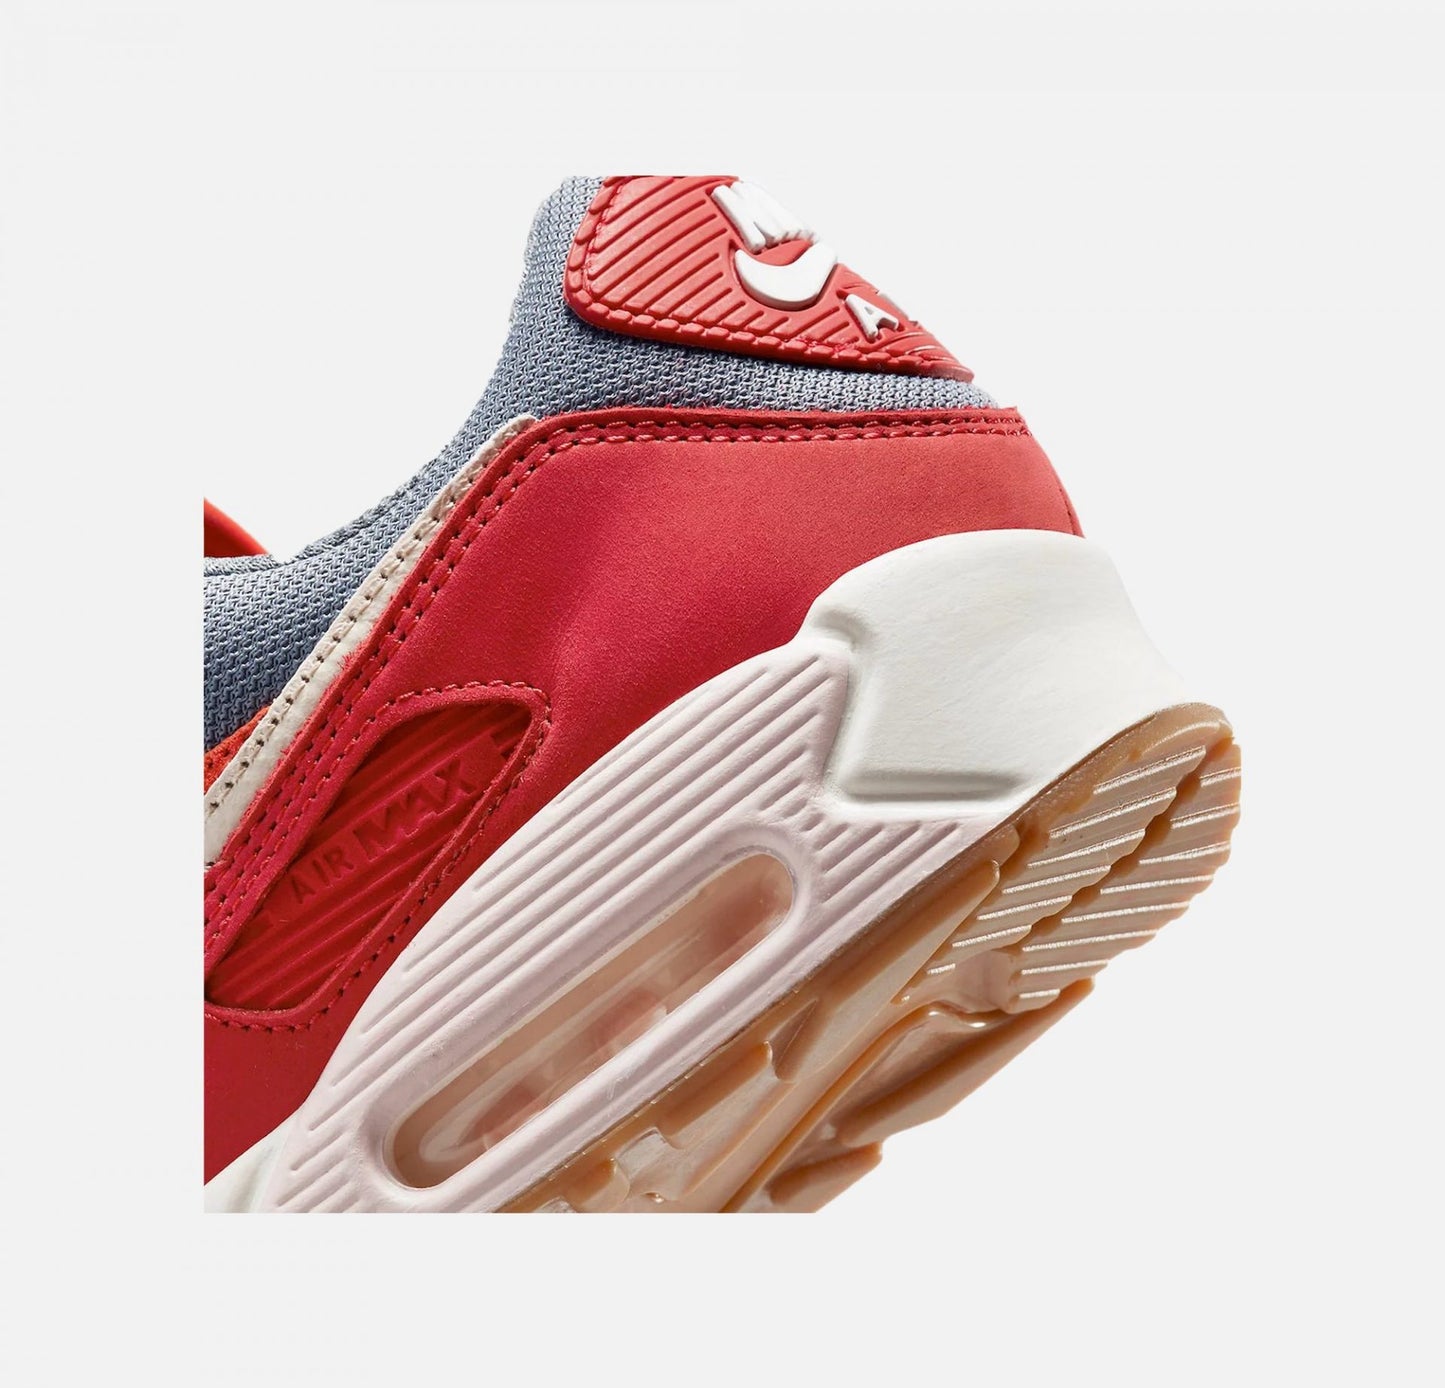 AIR MAX 90 ' GYM RED/PALE IVORY '